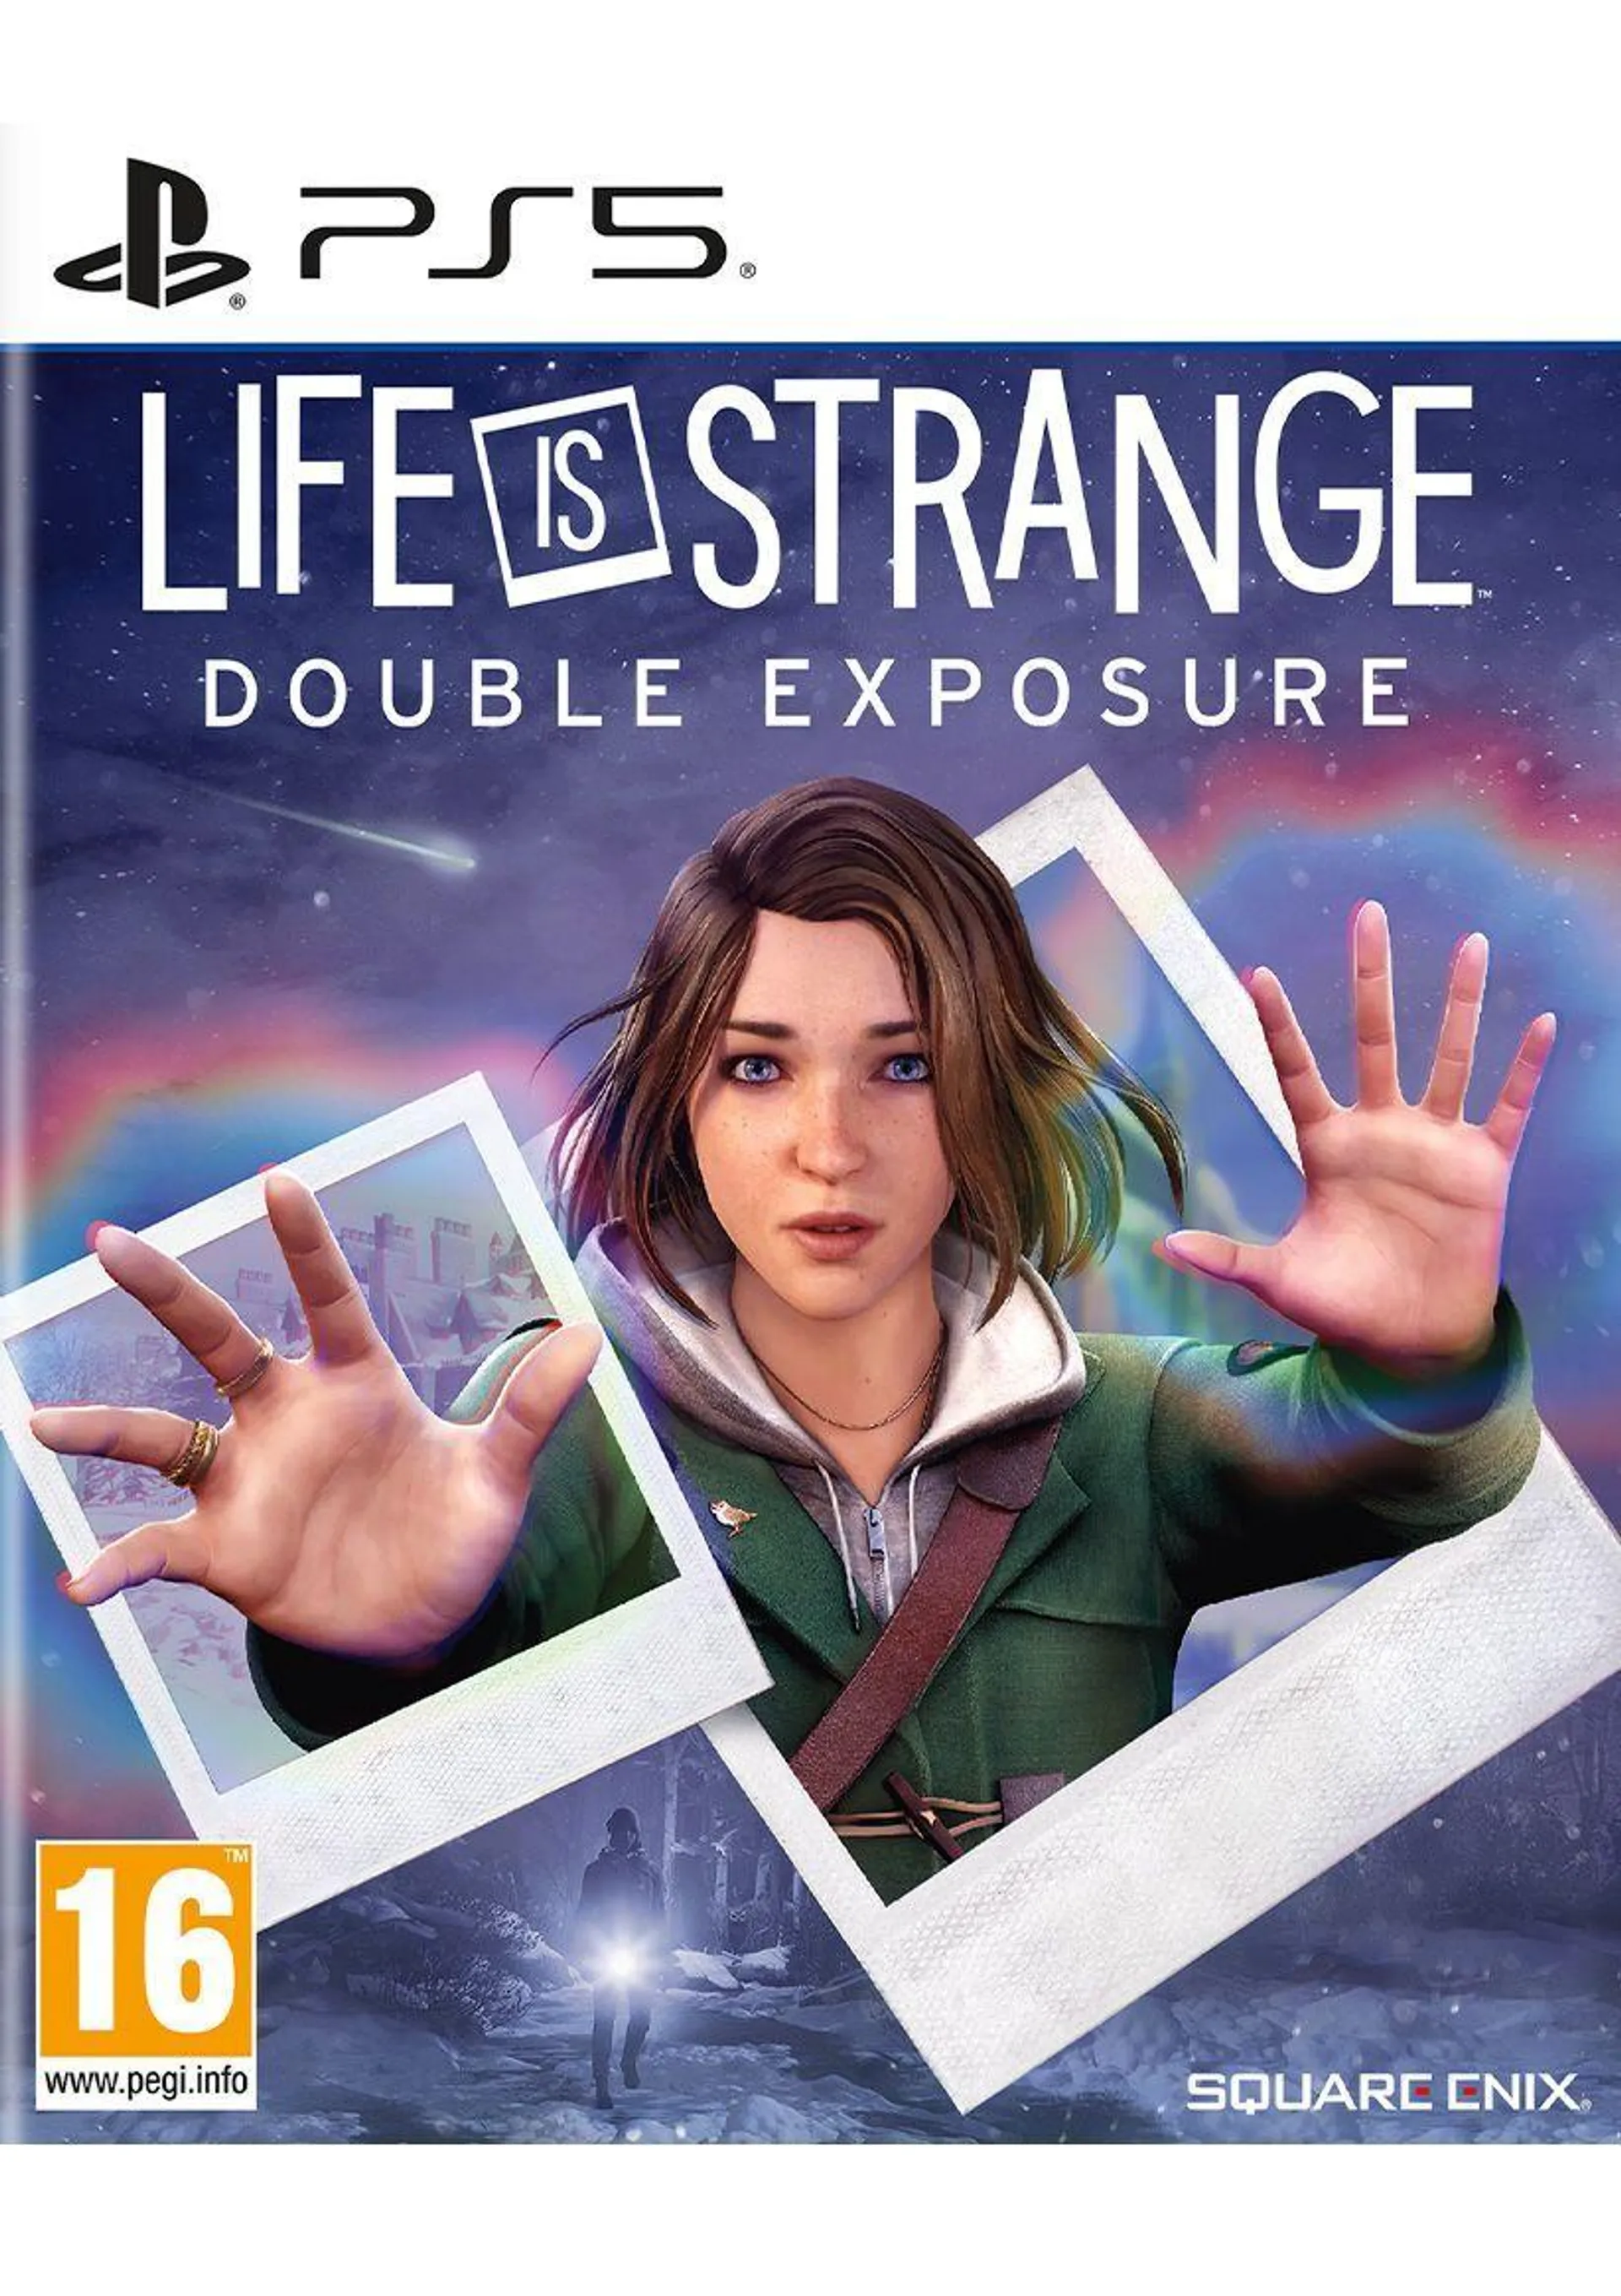 Life Is Strange: Double Exposure on PlayStation 5